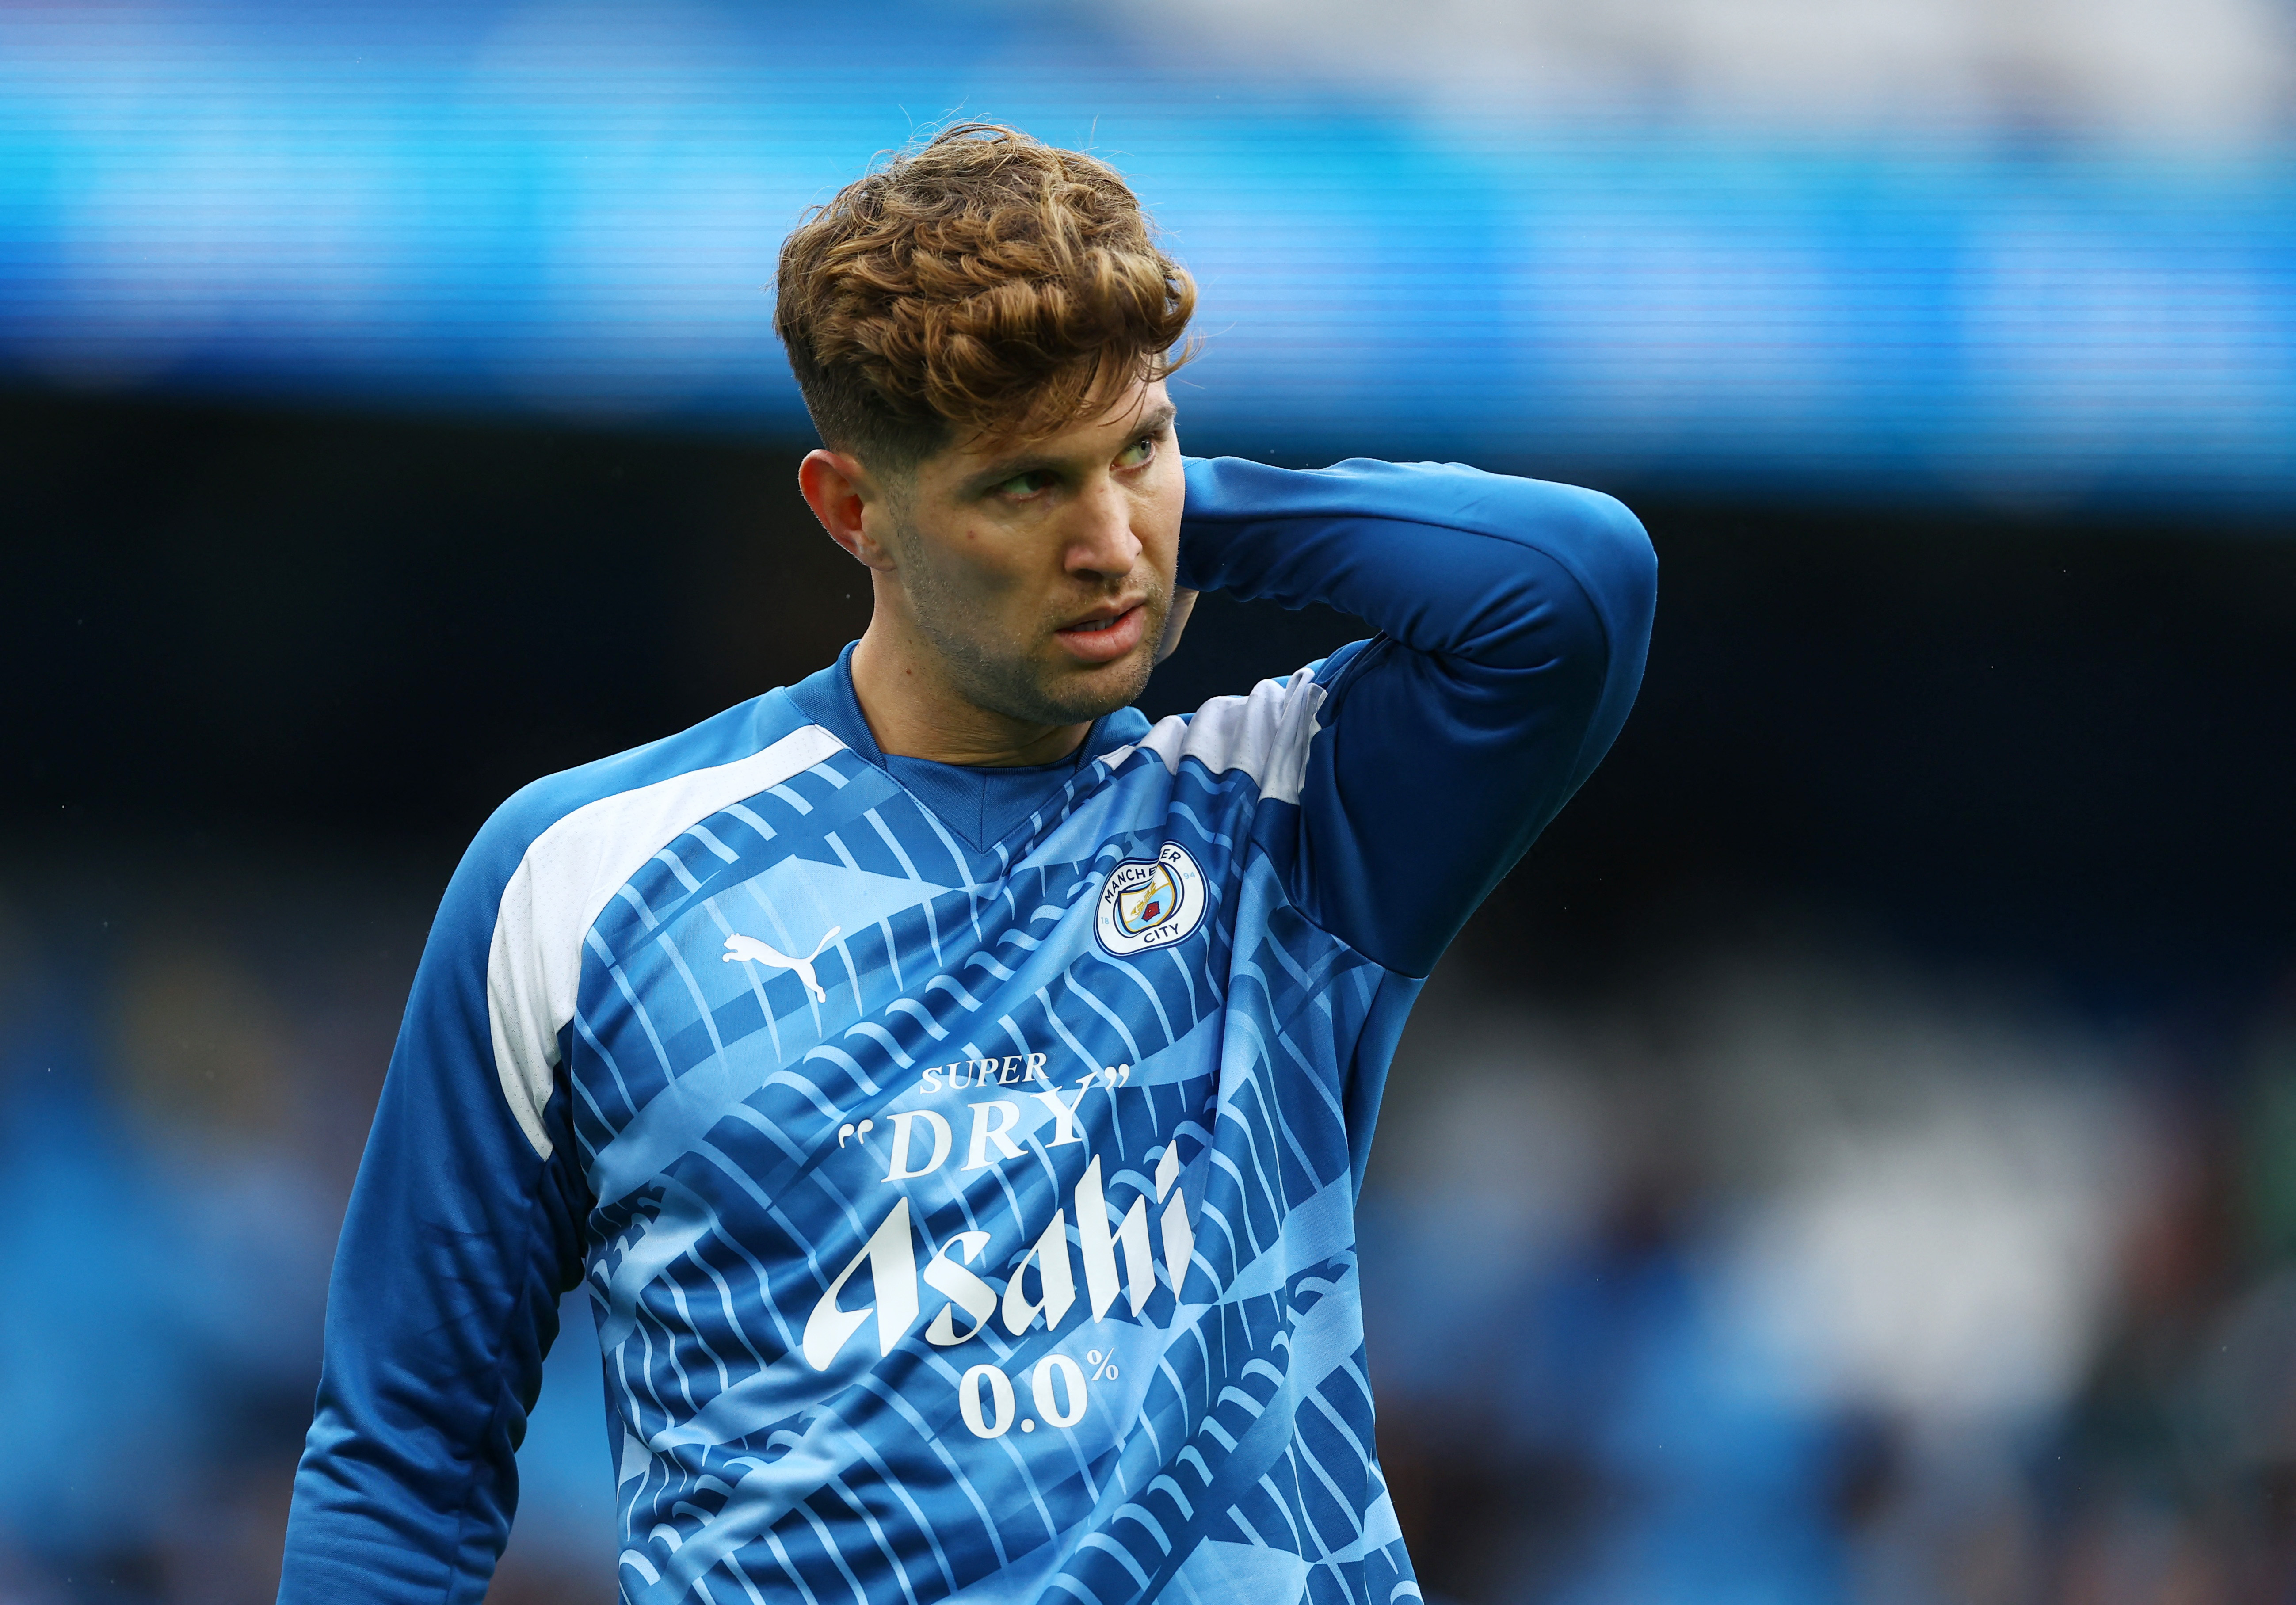 Man City must 'use the pain' to return to winning ways, says Stones